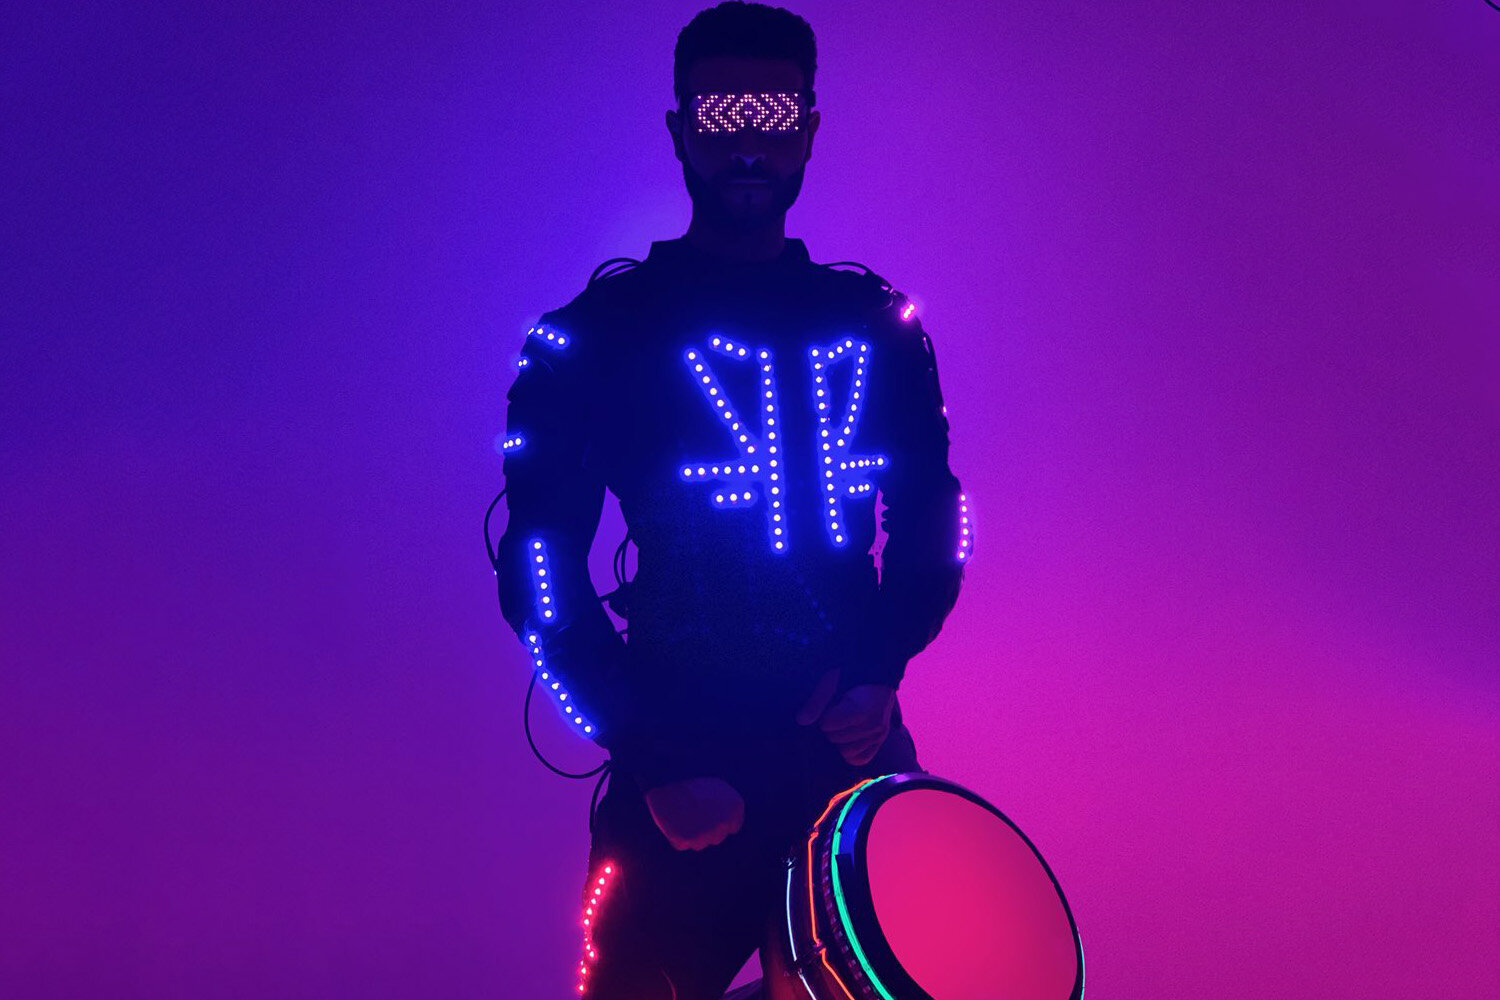 Our high-impact LED bongo player will light up the stage while drumming to the beat of the music.